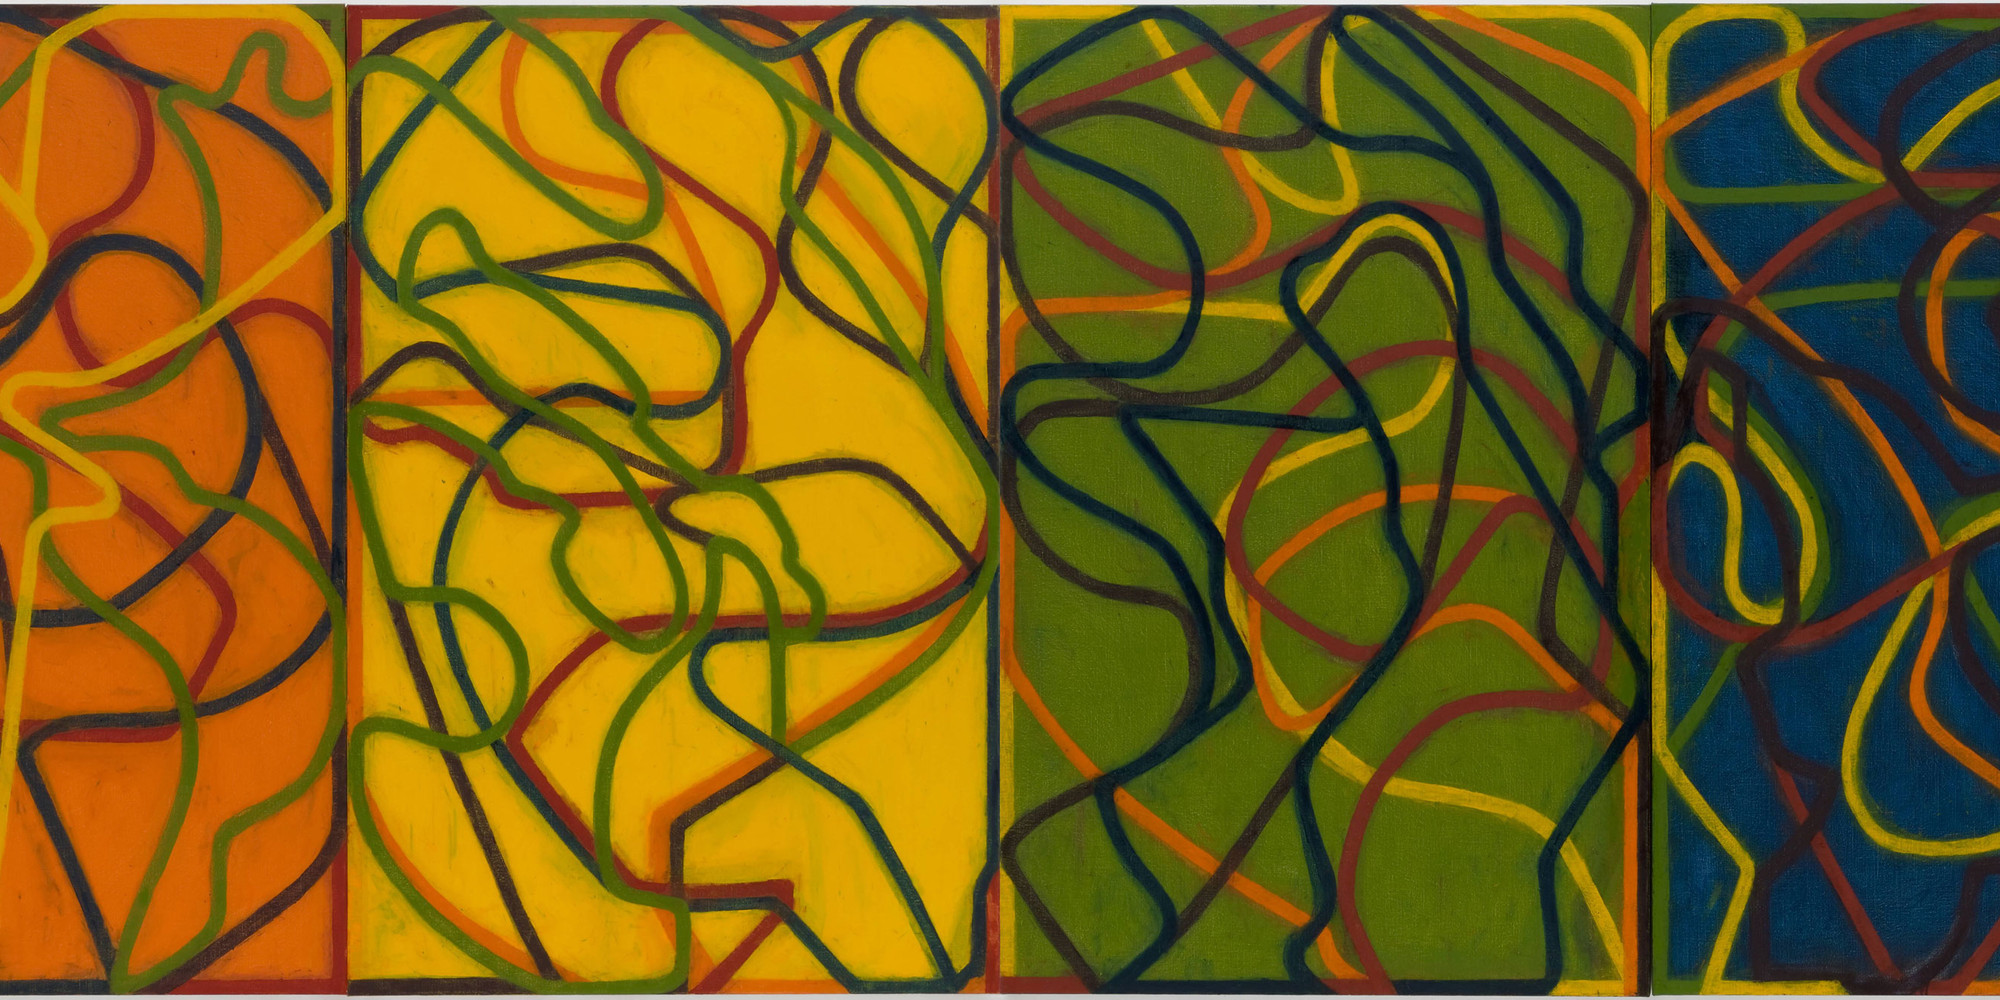 Brice Marden. The Propitious Garden of Plane Image, Third Version. 2000–06. Oil on linen, six panels, 6 × 24&#39; (182.9 × 731.5 cm). The Museum of Modern Art, New York. Gift of Donald B. and Catherine C. Marron. © 2023 Brice Marden